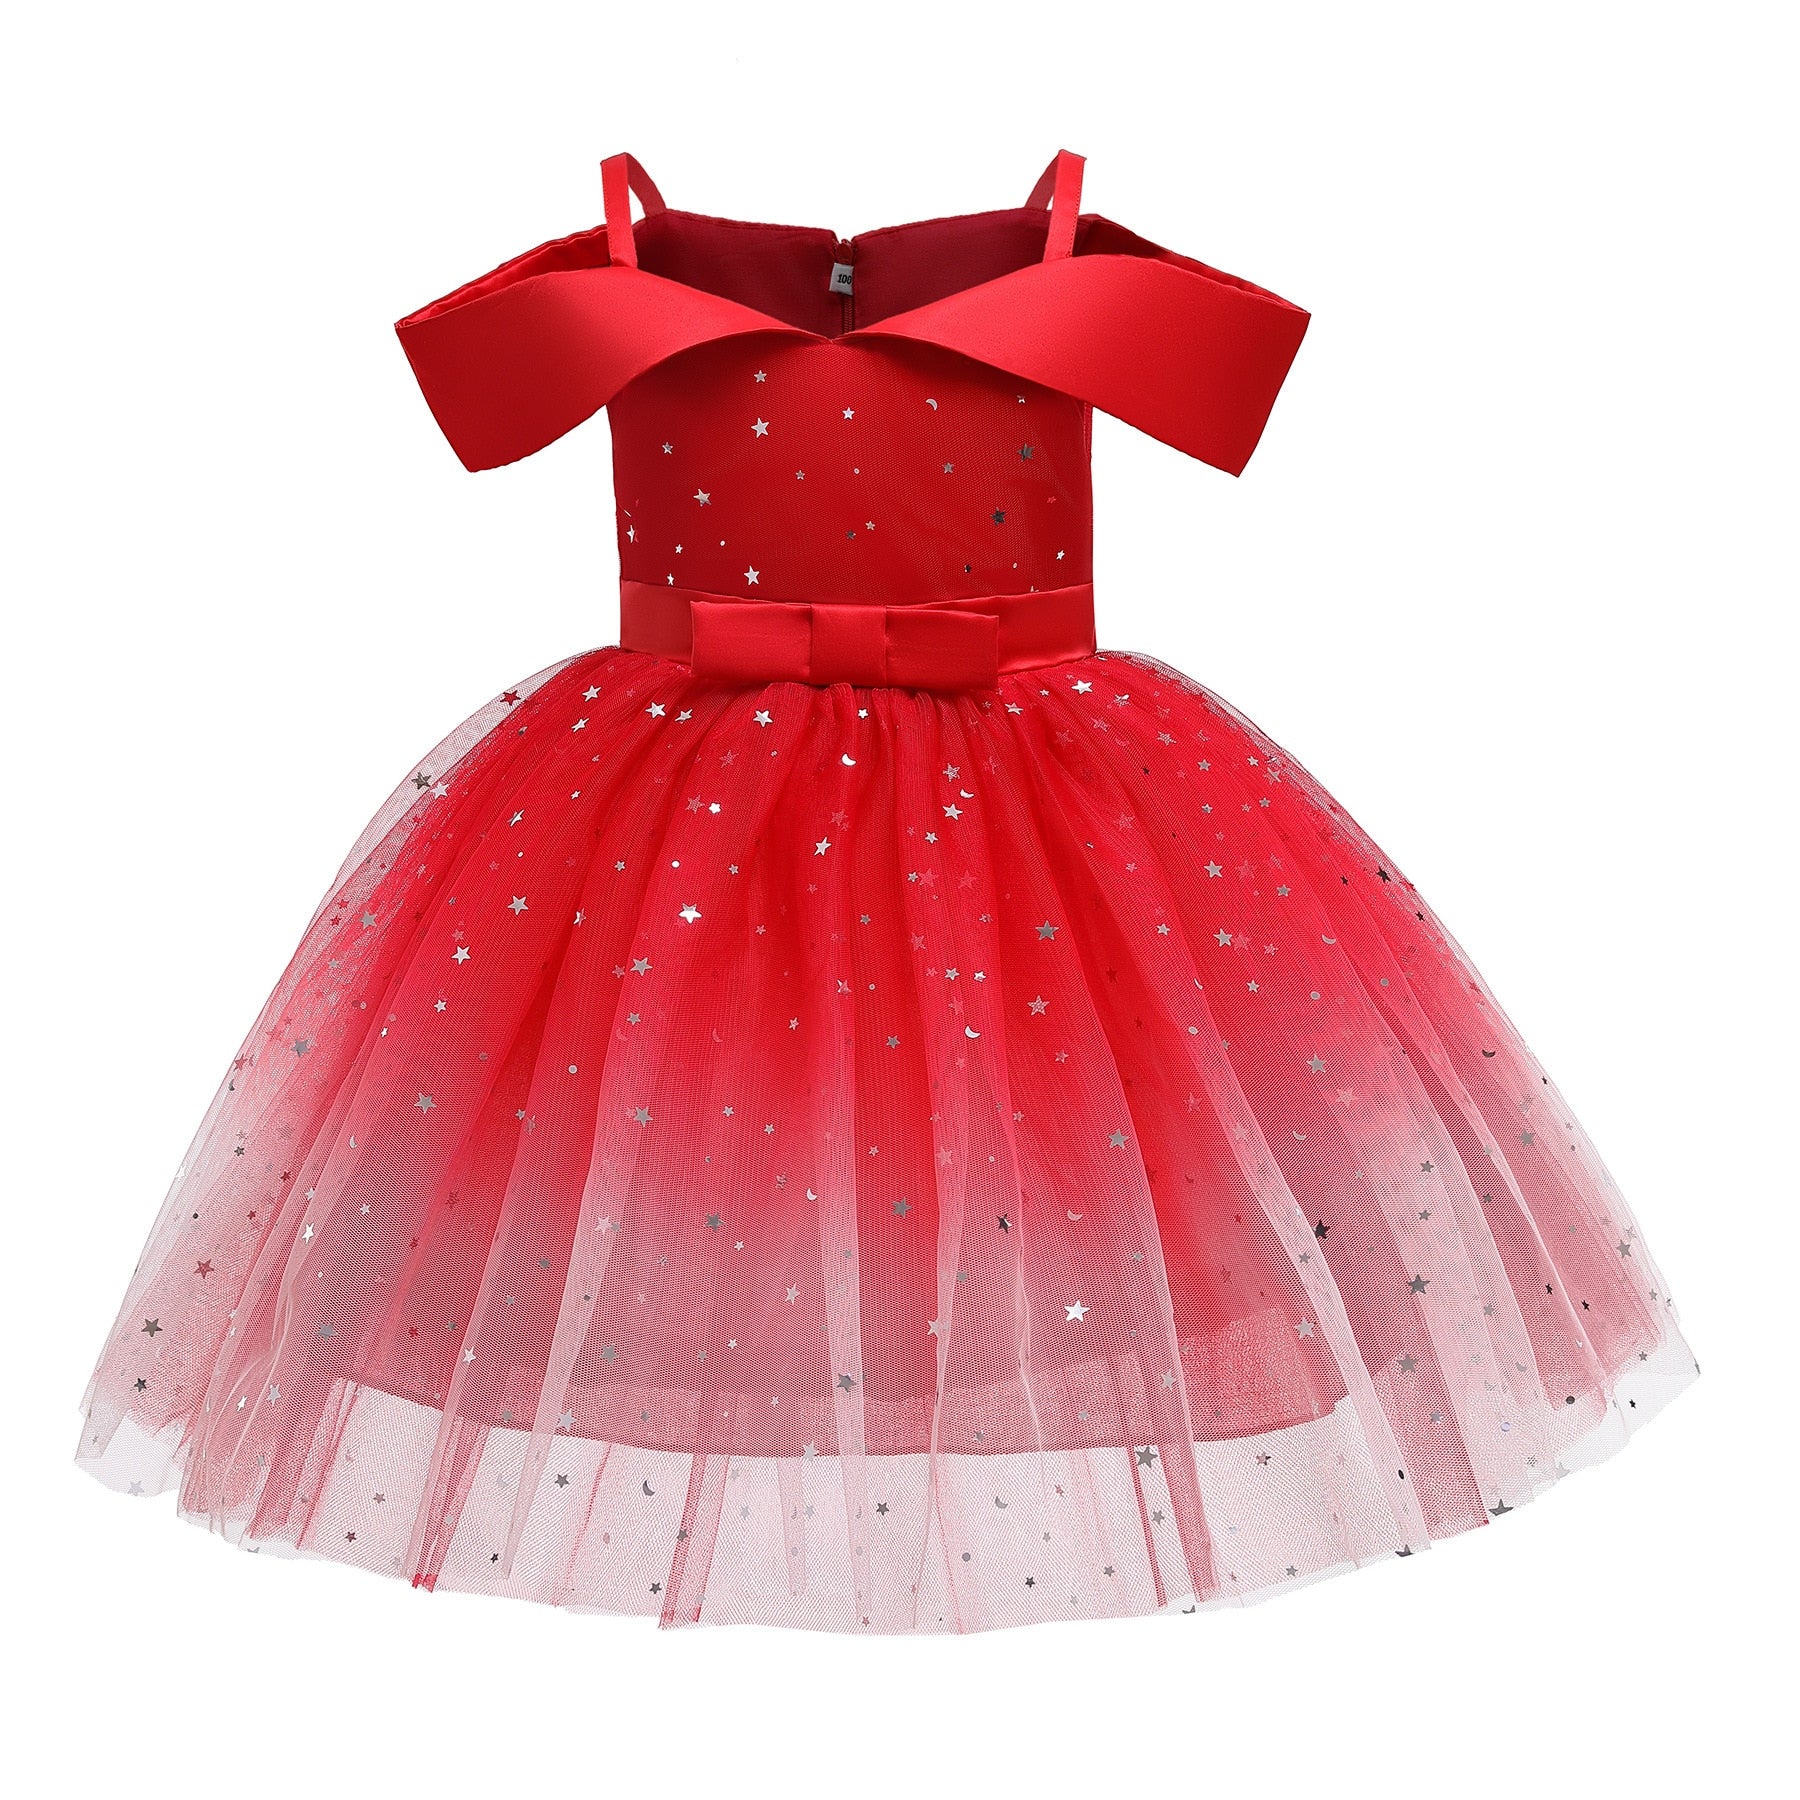 Girls Flower Striped Dress  with Floral for Princess